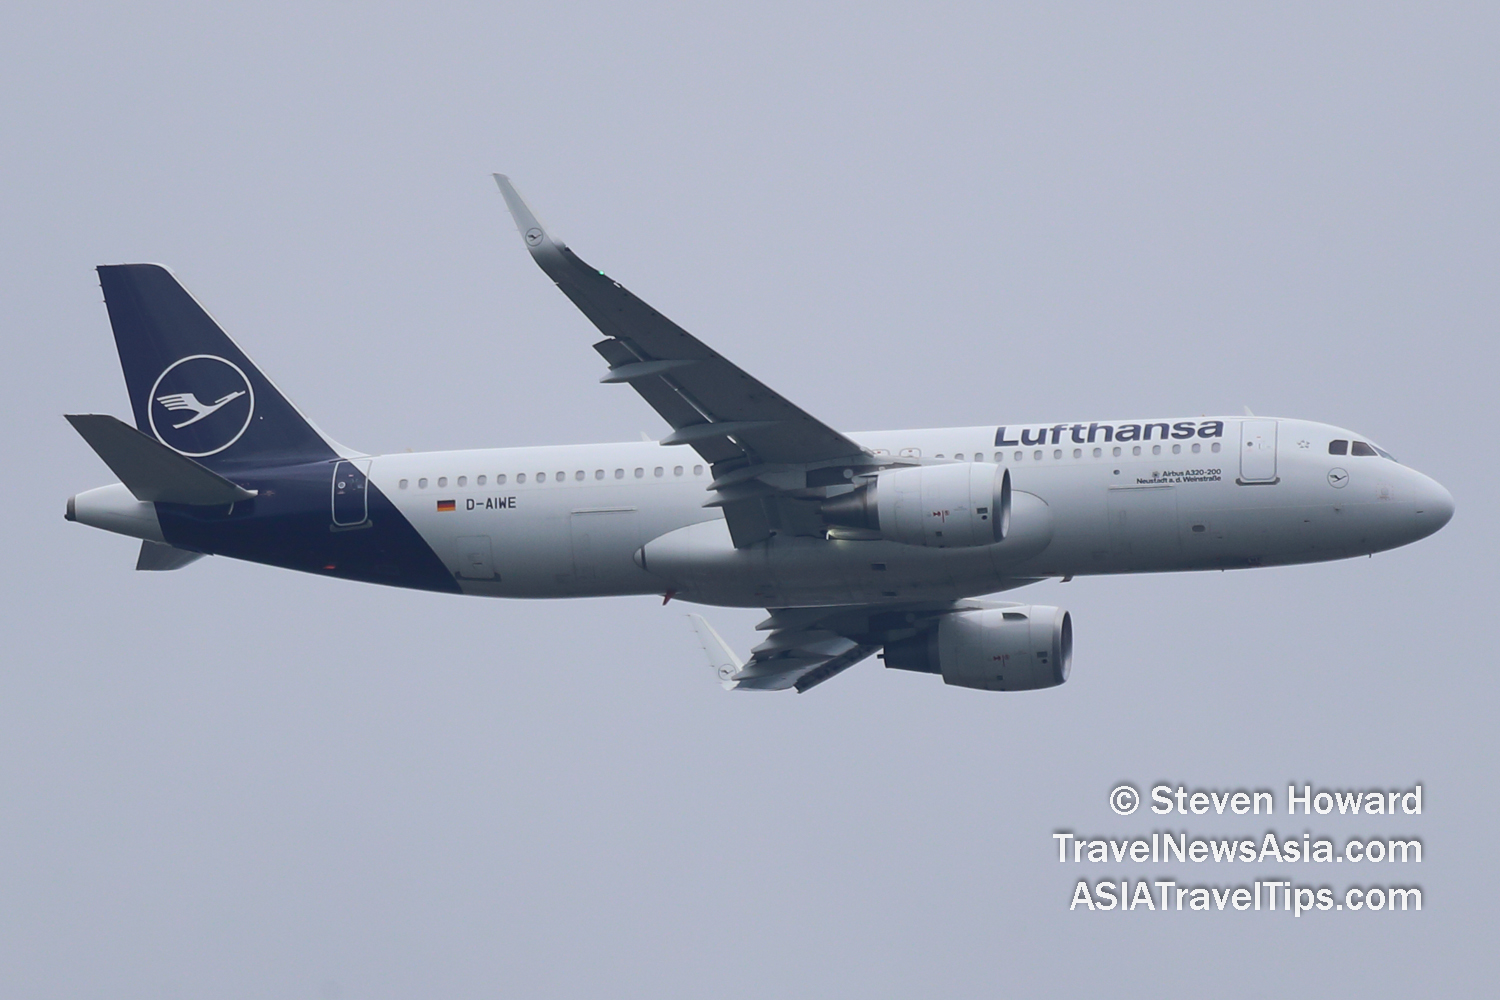 Lufthansa Airbus A320 reg: D-AIWE. Picture by Steven Howard of TravelNewsAsia.com Click to enlarge.